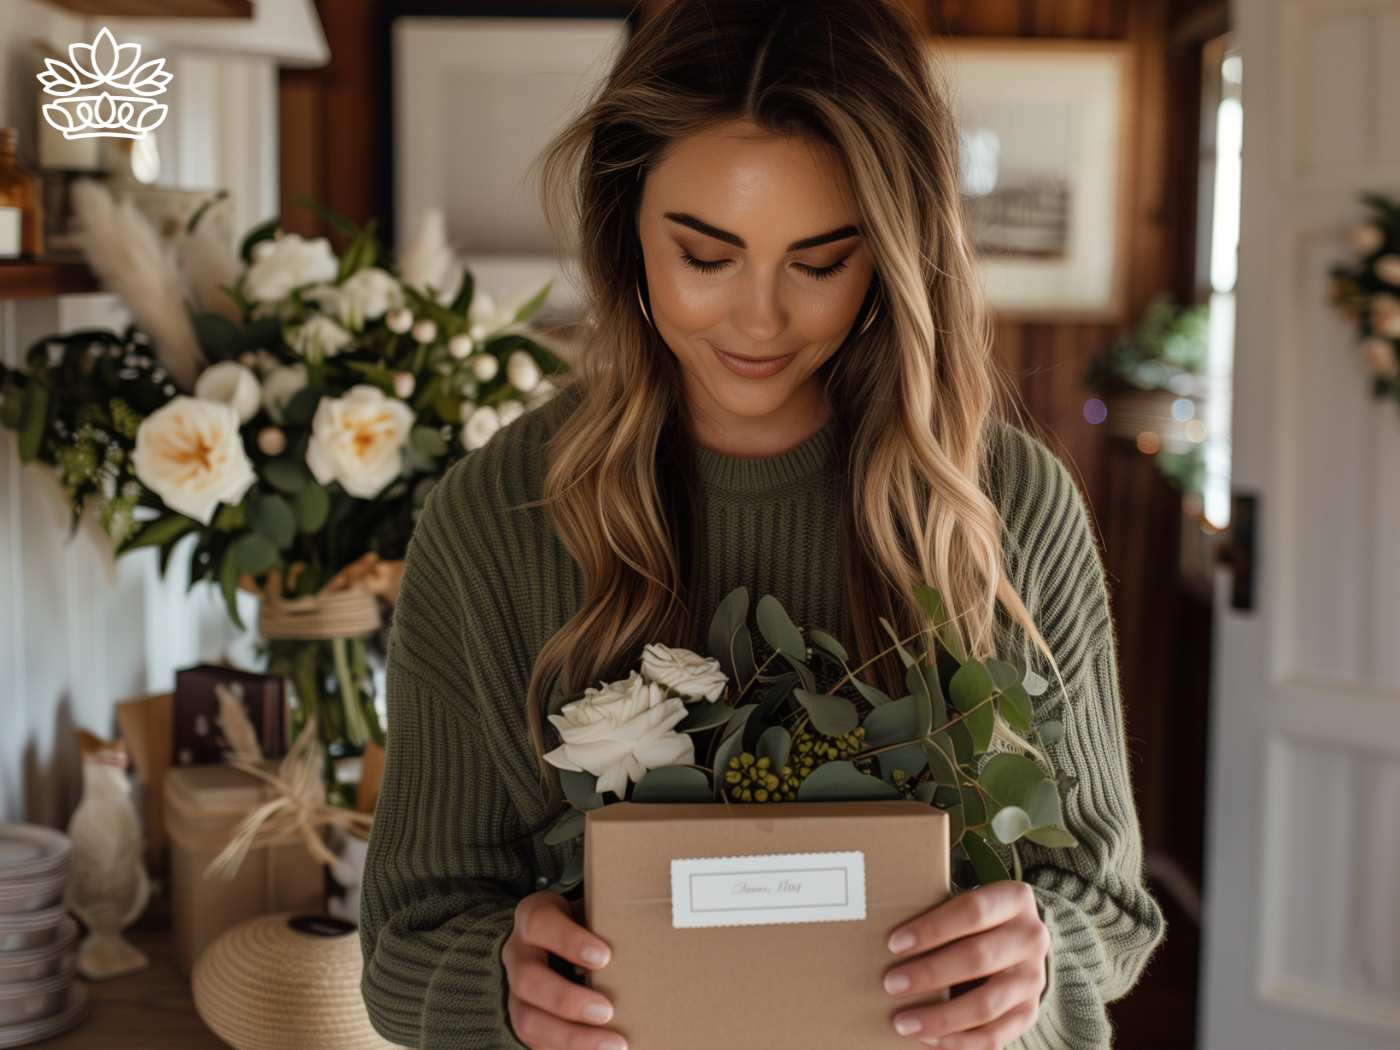 Smiling woman holding a gift basket with elegant white roses and lush greenery, representing the amazing and wonderful service with timely and excellent delivery from the Cape Town Gift Delivery Collection by Fabulous Flowers and Gifts, South Africa.